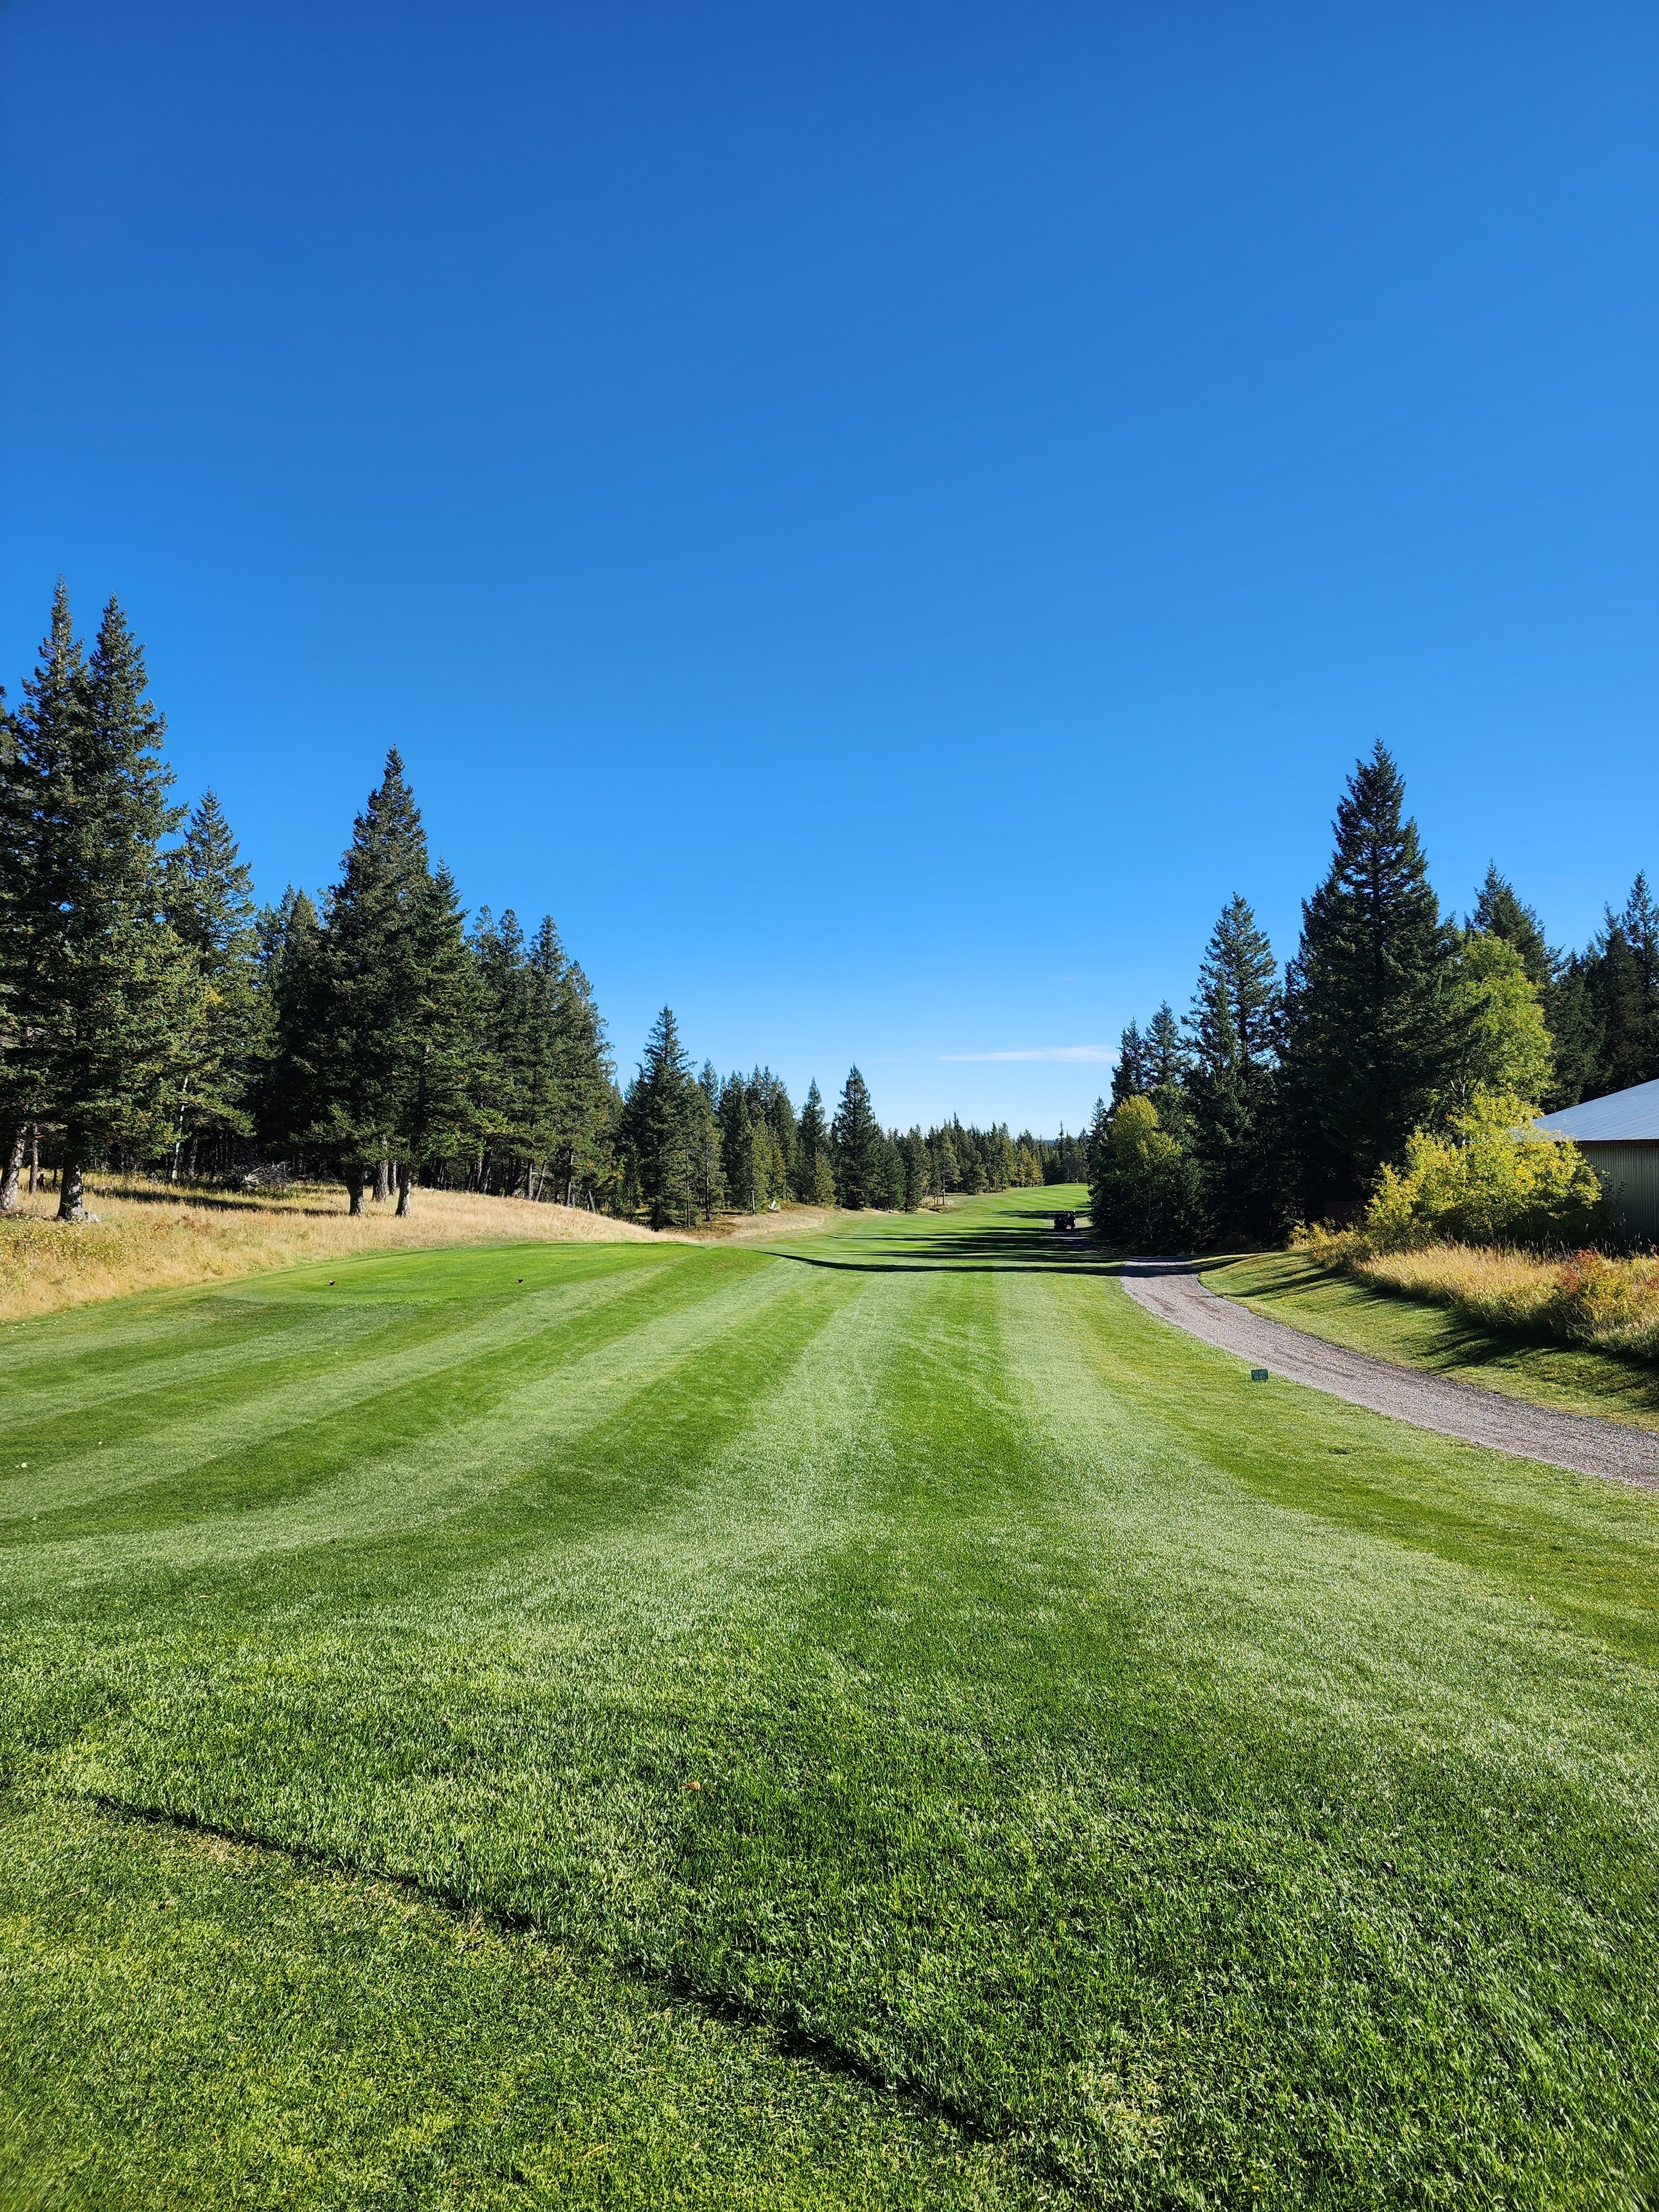 Picture of a place: Brewster&#39;s Kananaskis Ranch Golf Course